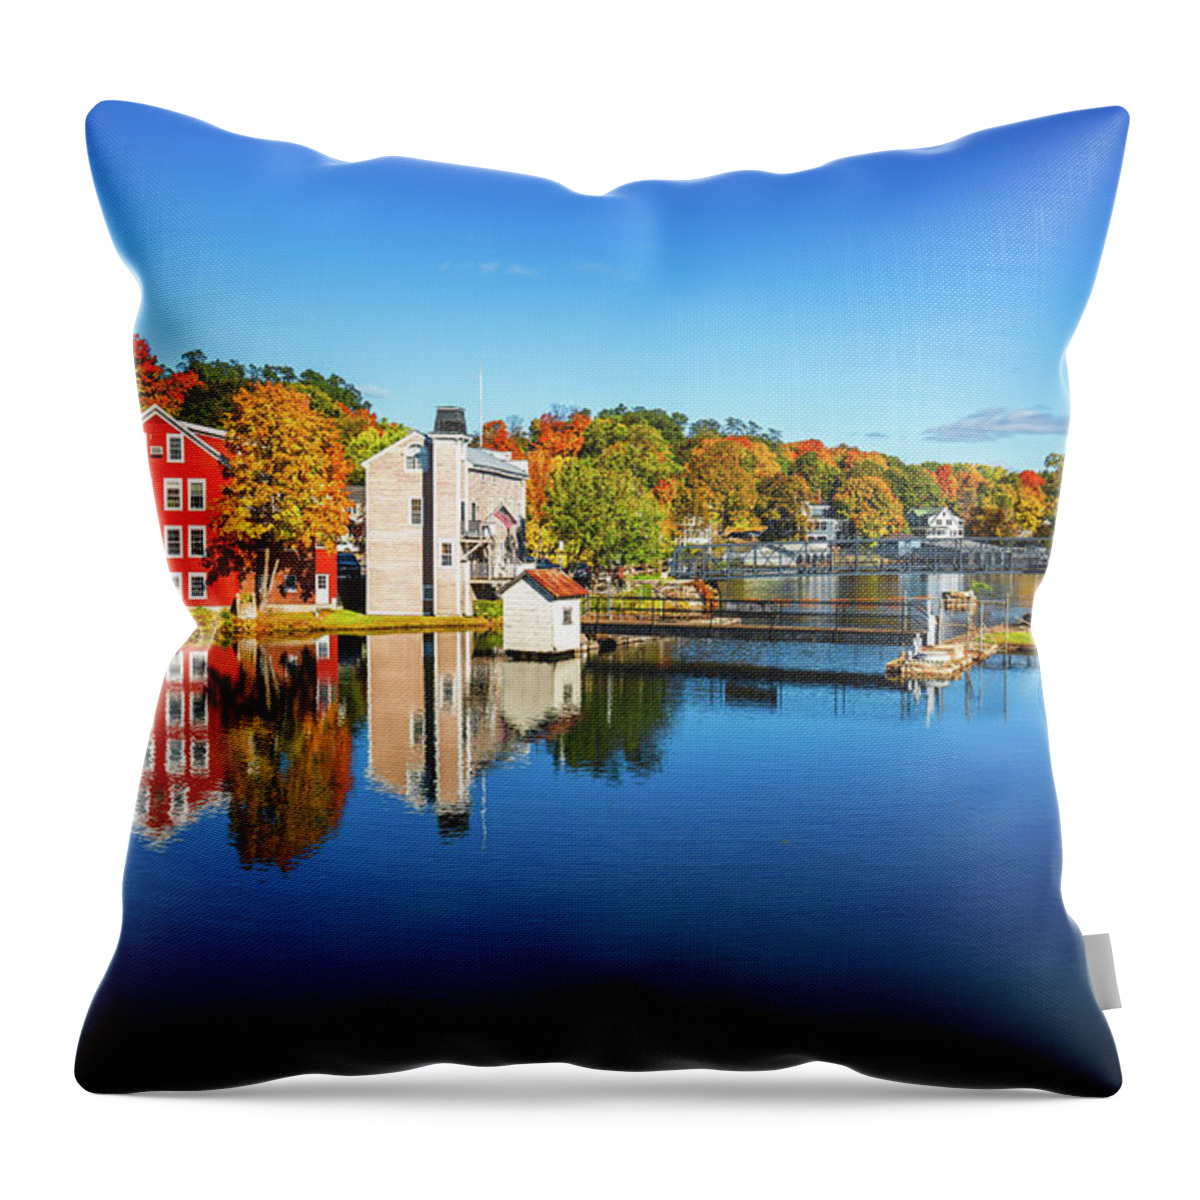 Autumn Throw Pillow featuring the photograph Lakeport Dam by Robert Clifford